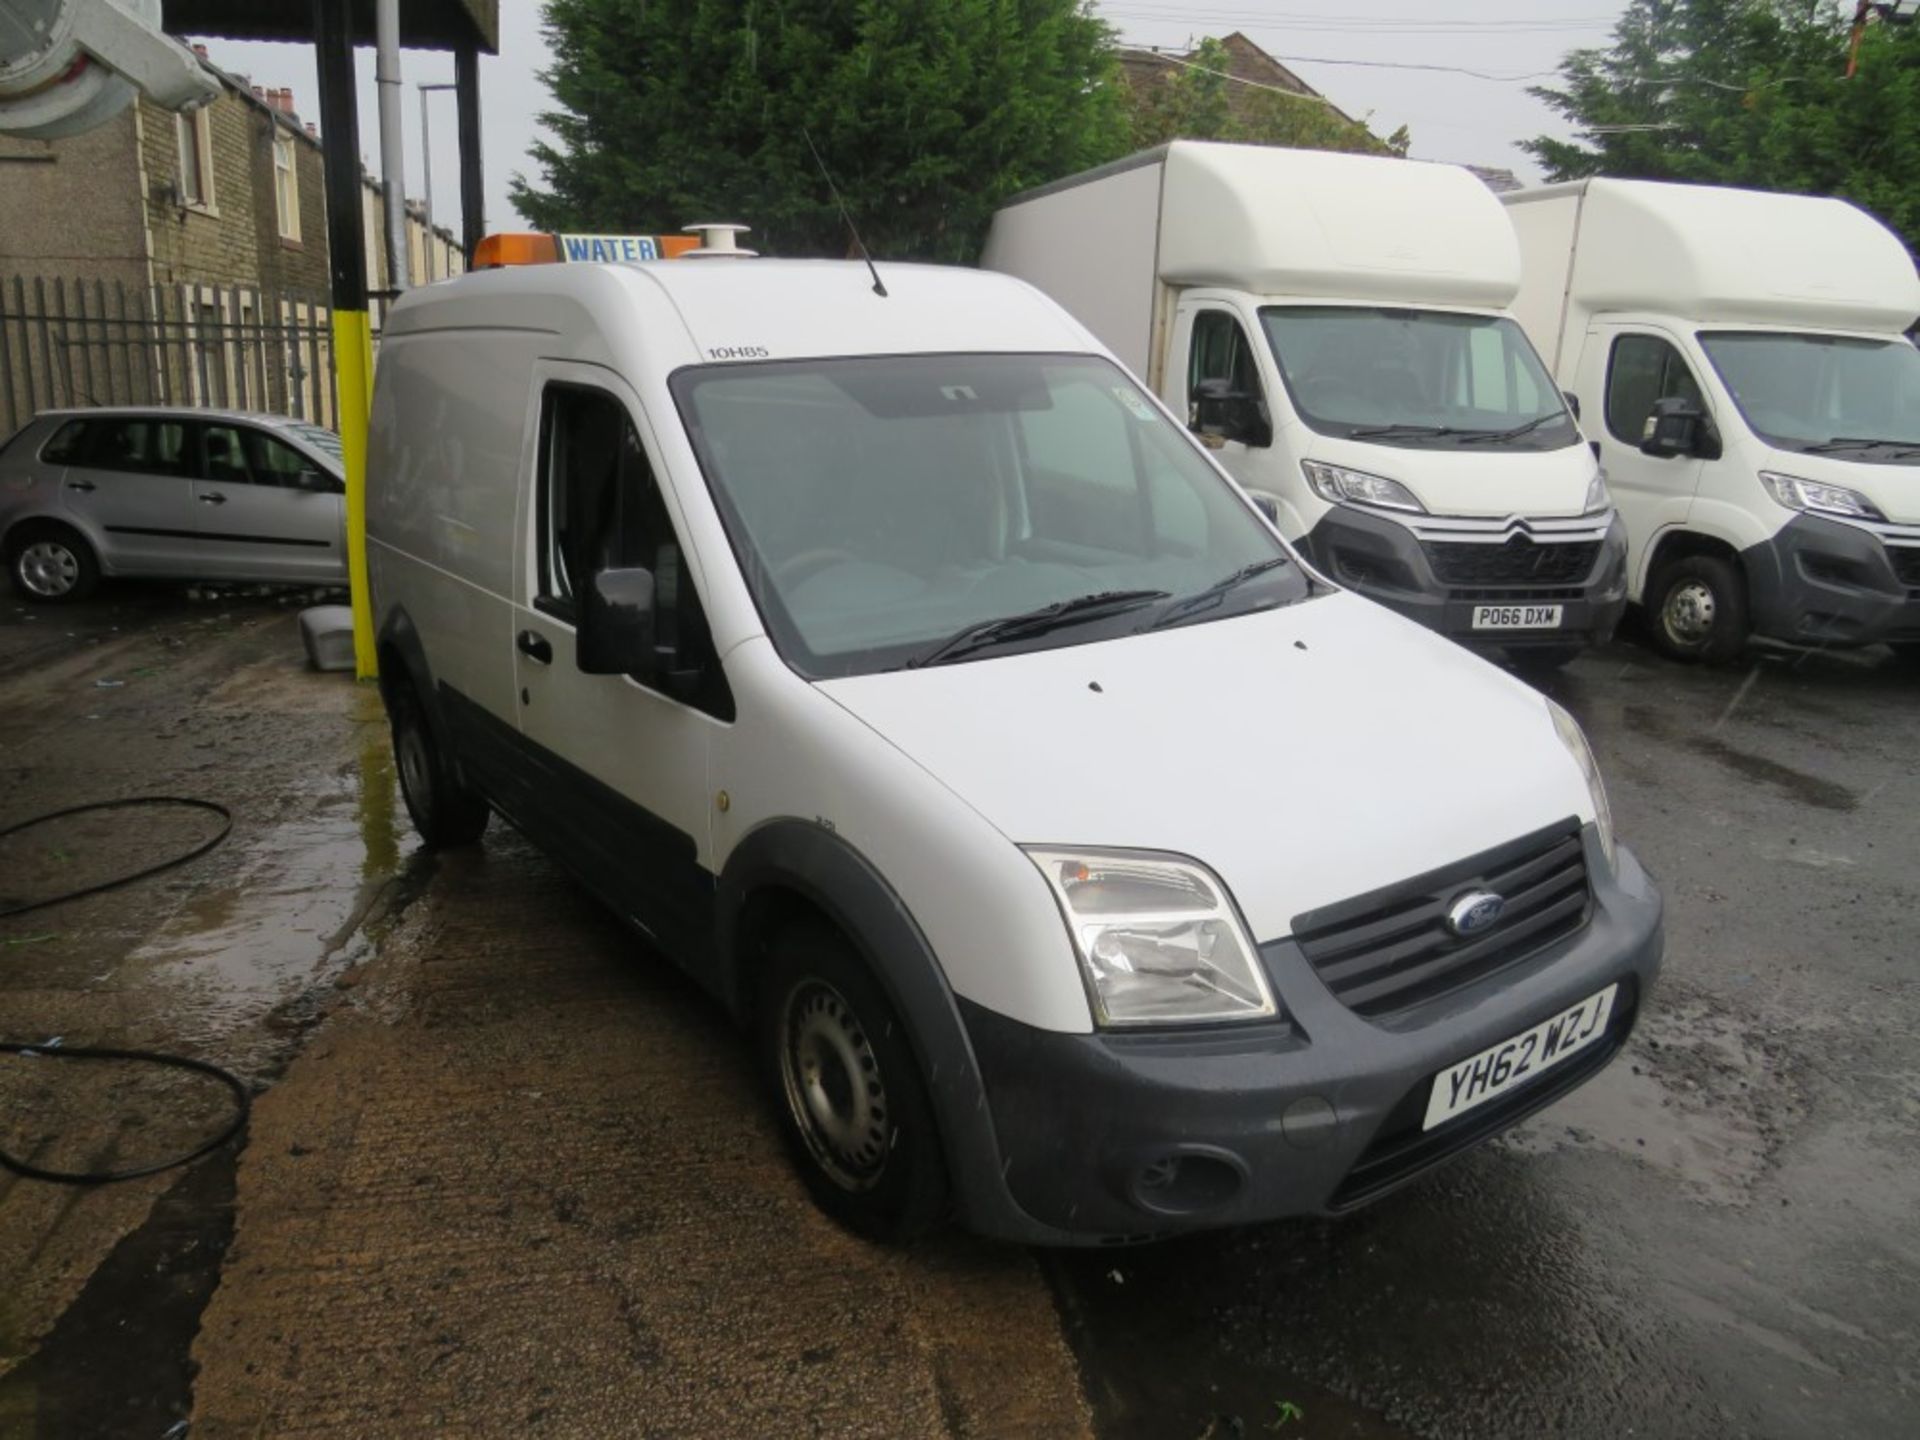 62 reg FORD TRANSIT CONNECT 90 T230 (DIRECT UNITED UTILITIES WATER) 1ST REG 12/12, TEST 06/21,